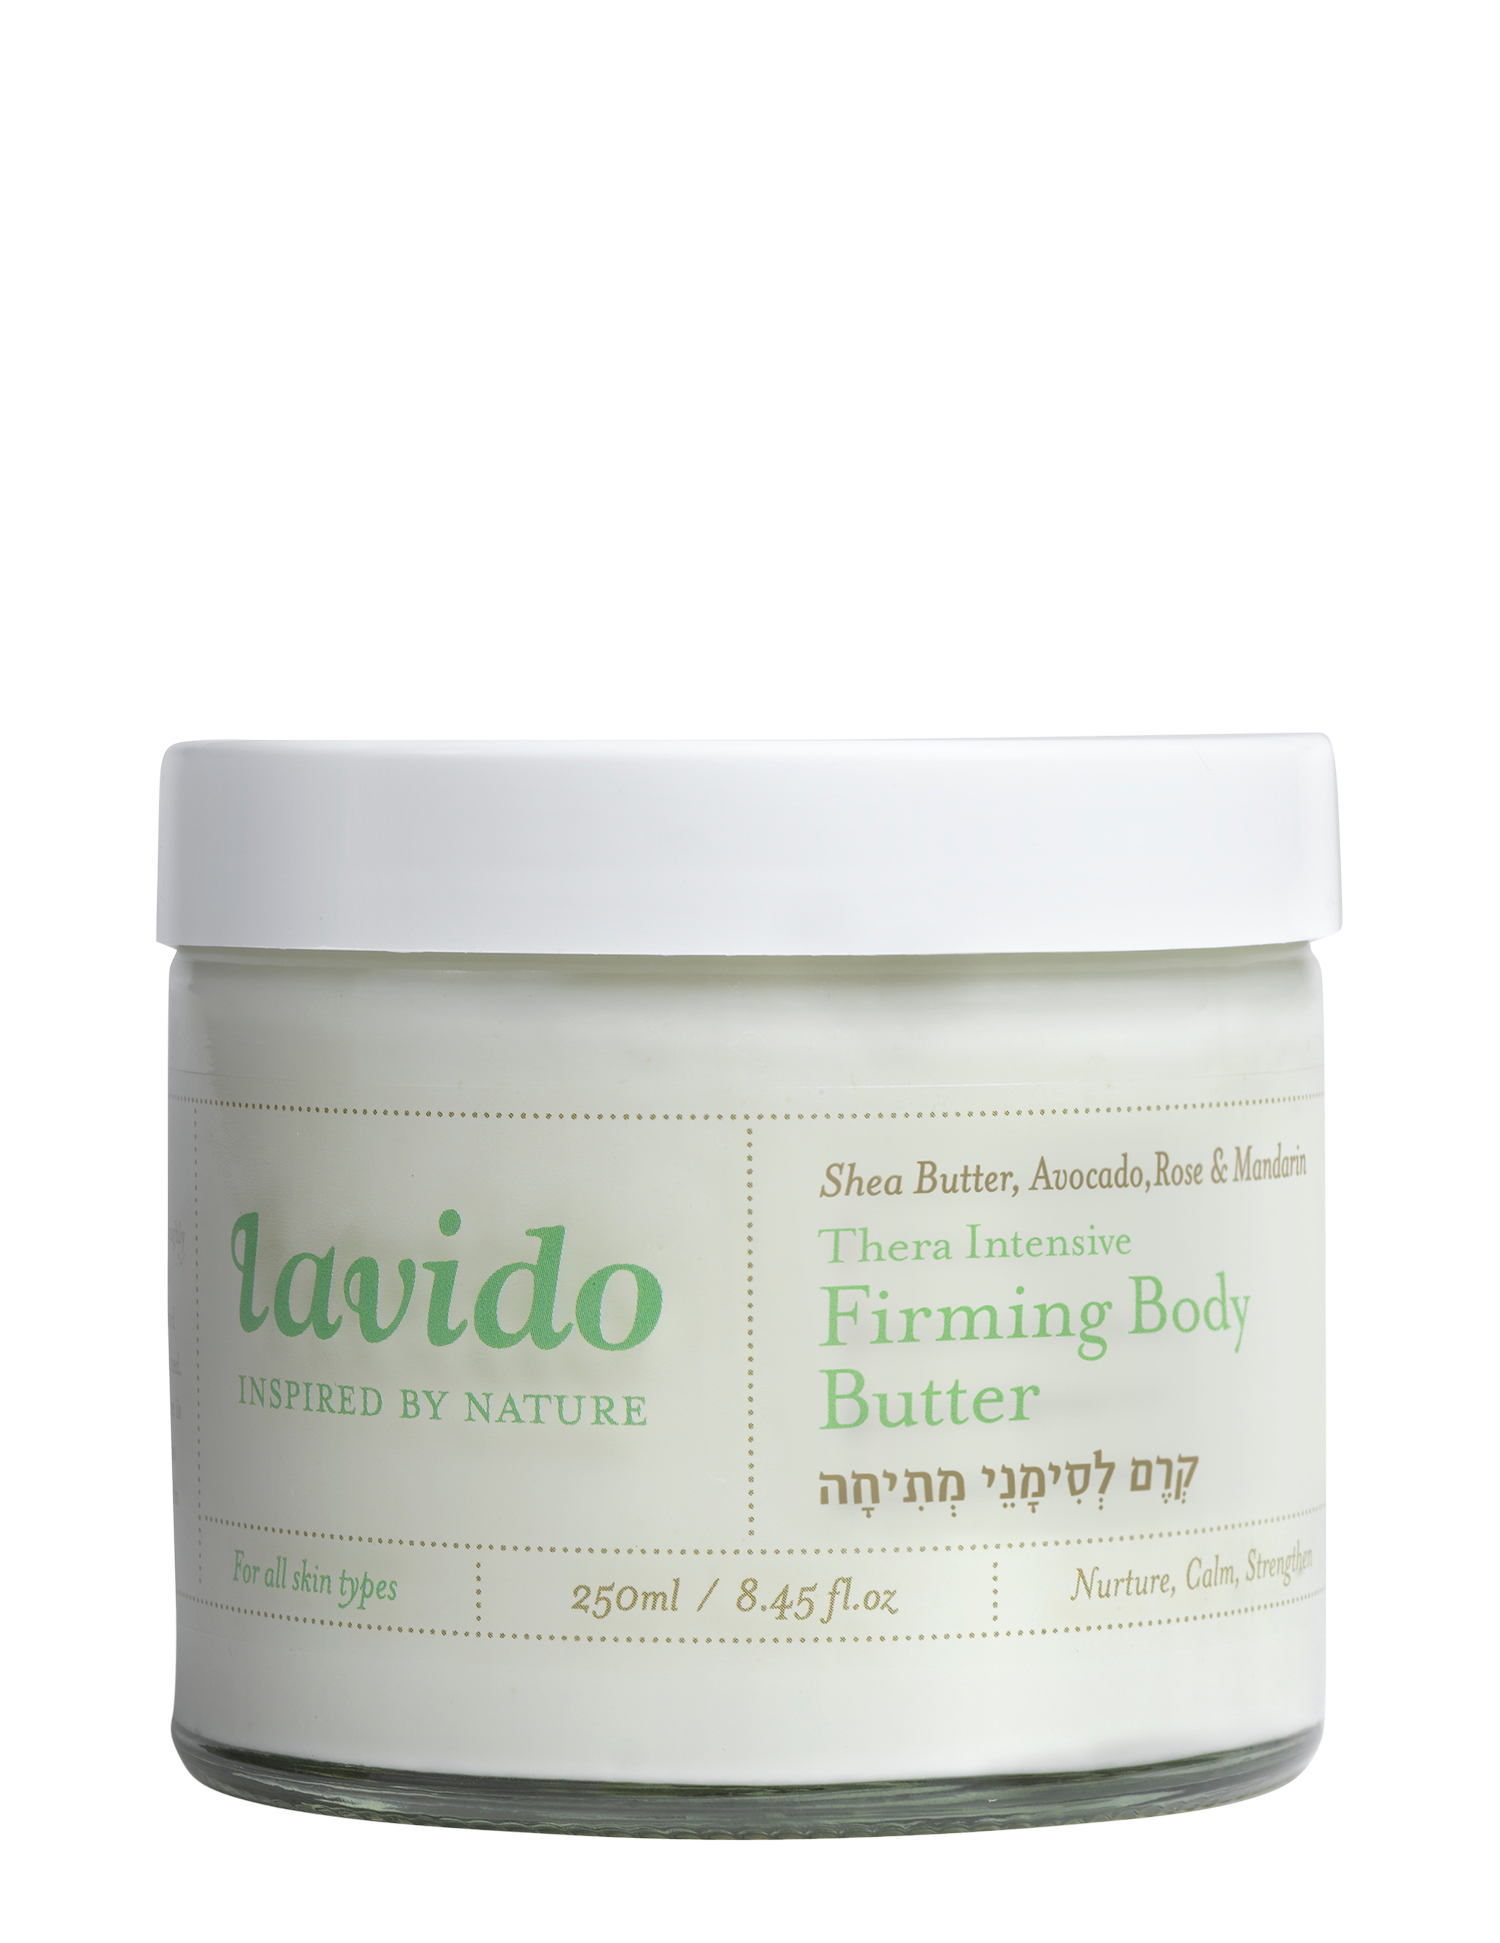 New Thera Intensive Firming Body Butter Lavido